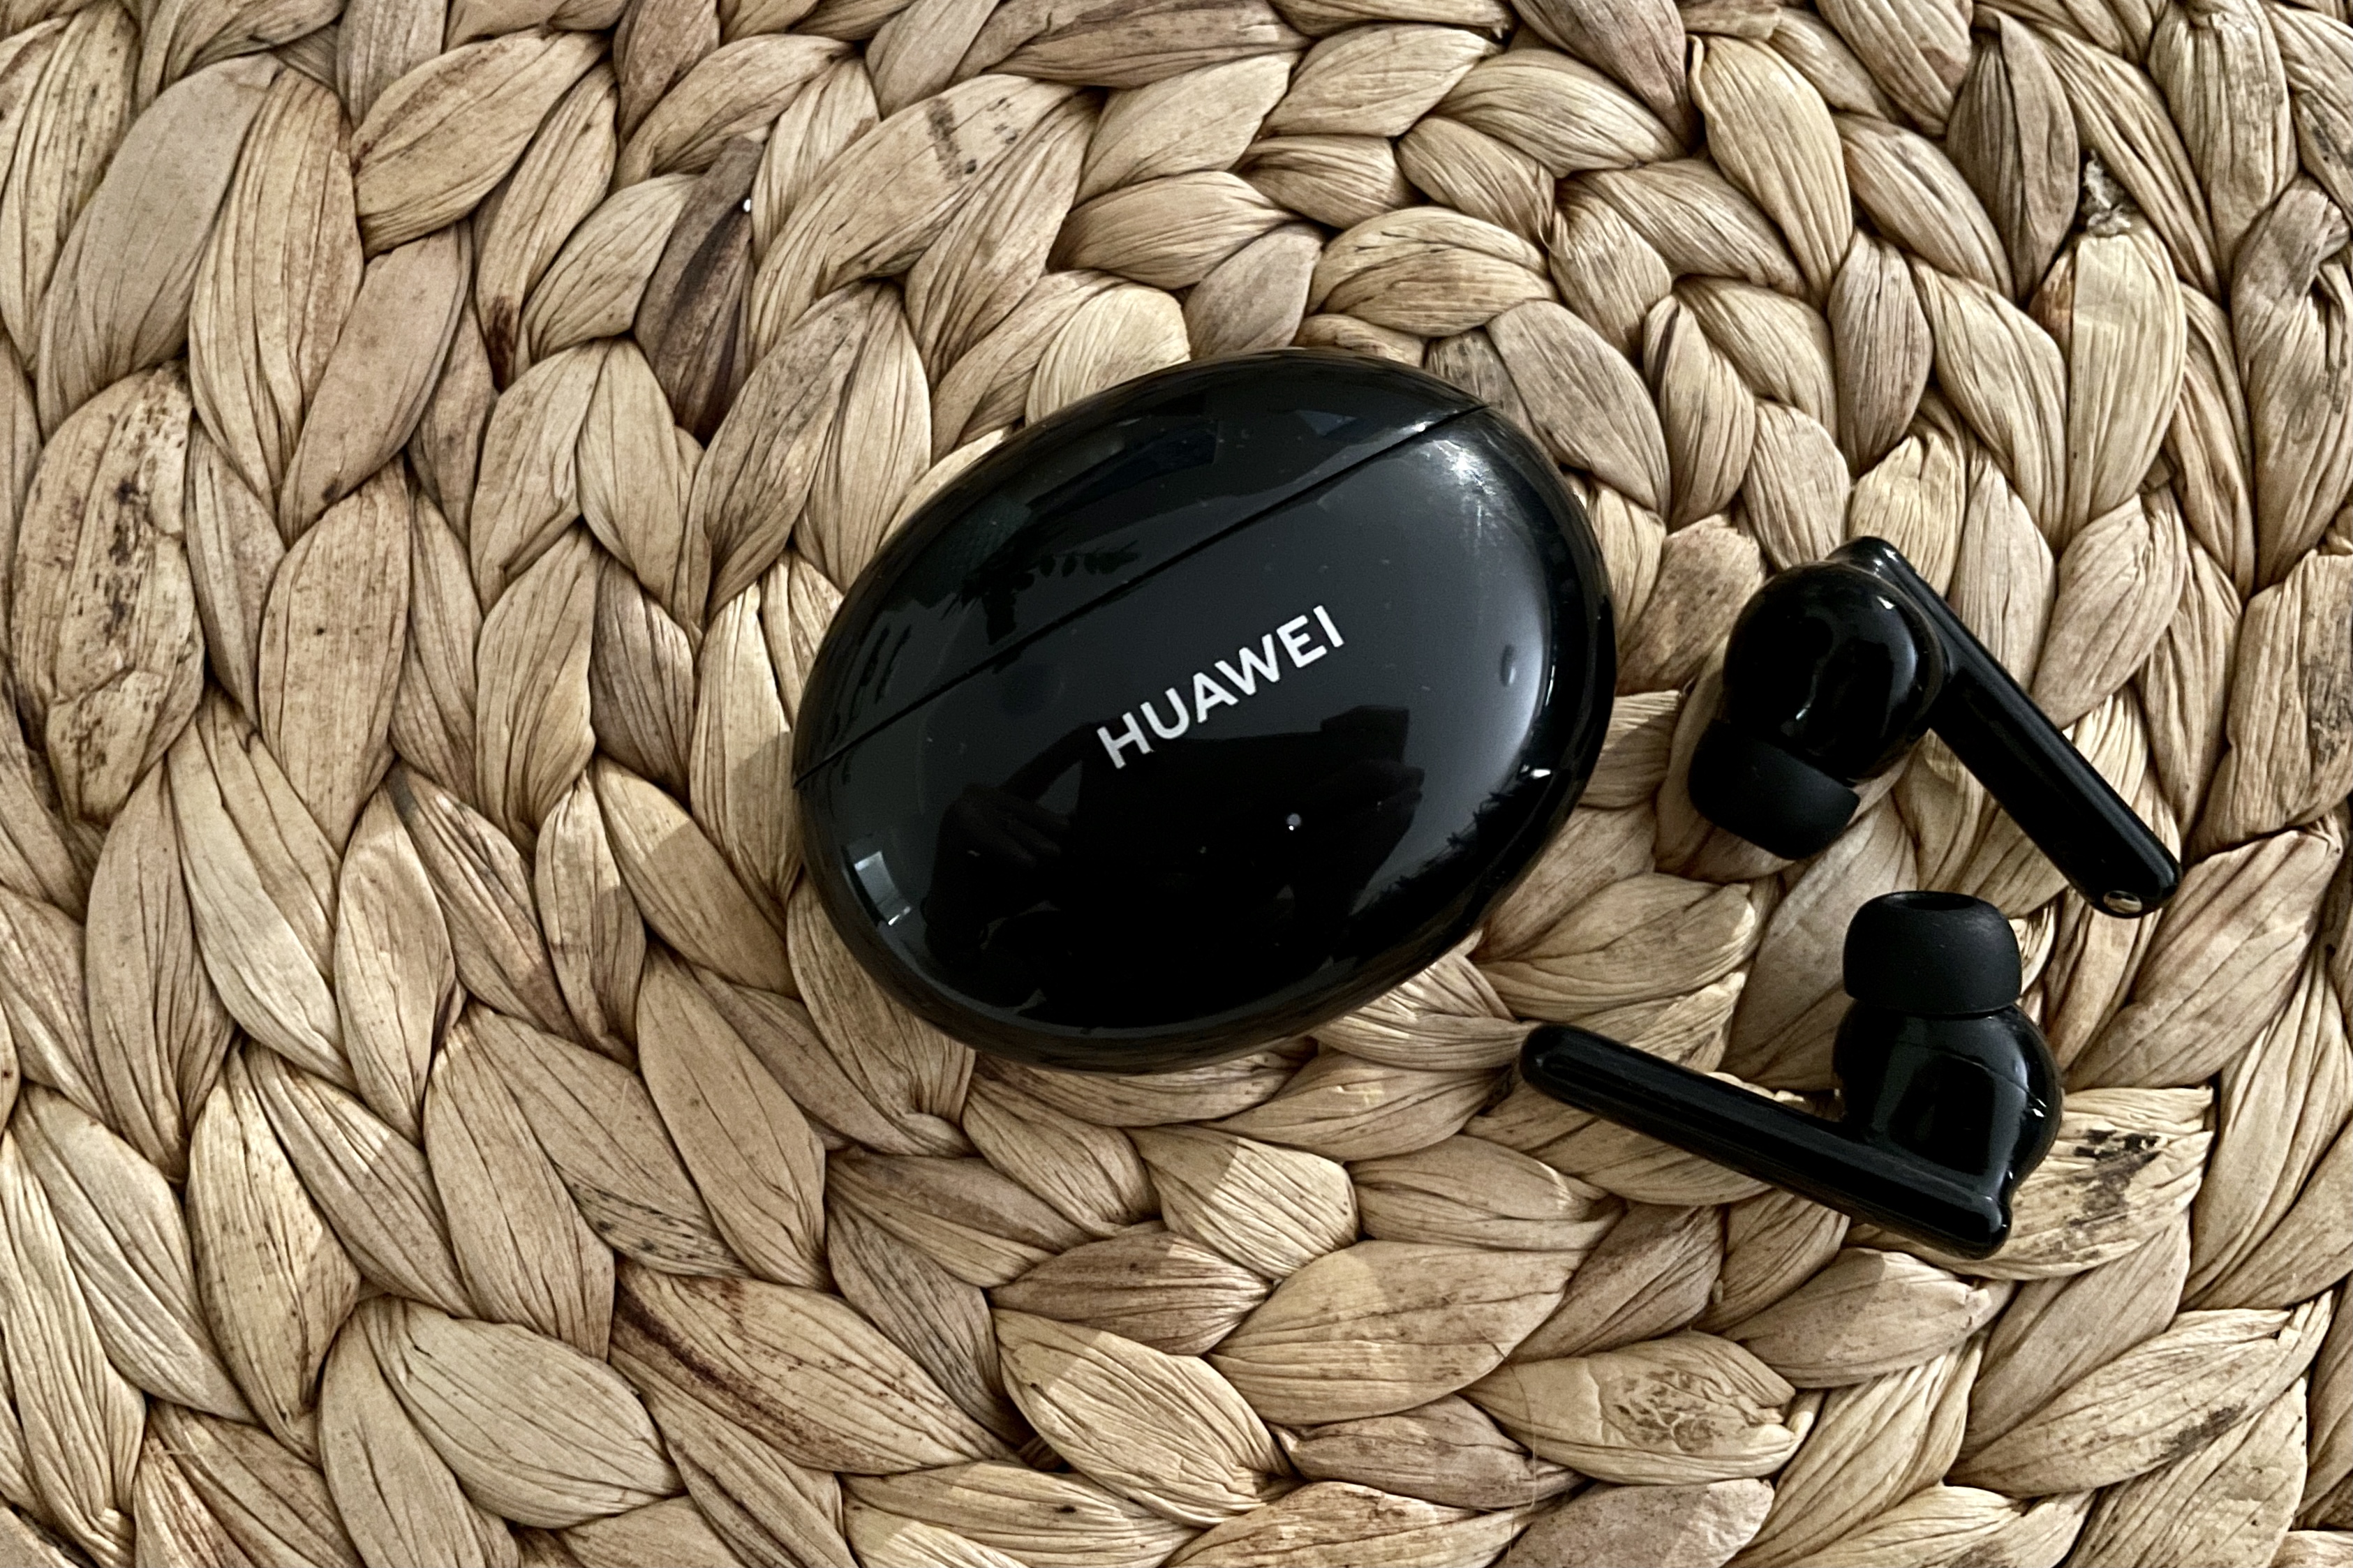 Everything You Need To Know About The HUAWEI FreeBuds 4i